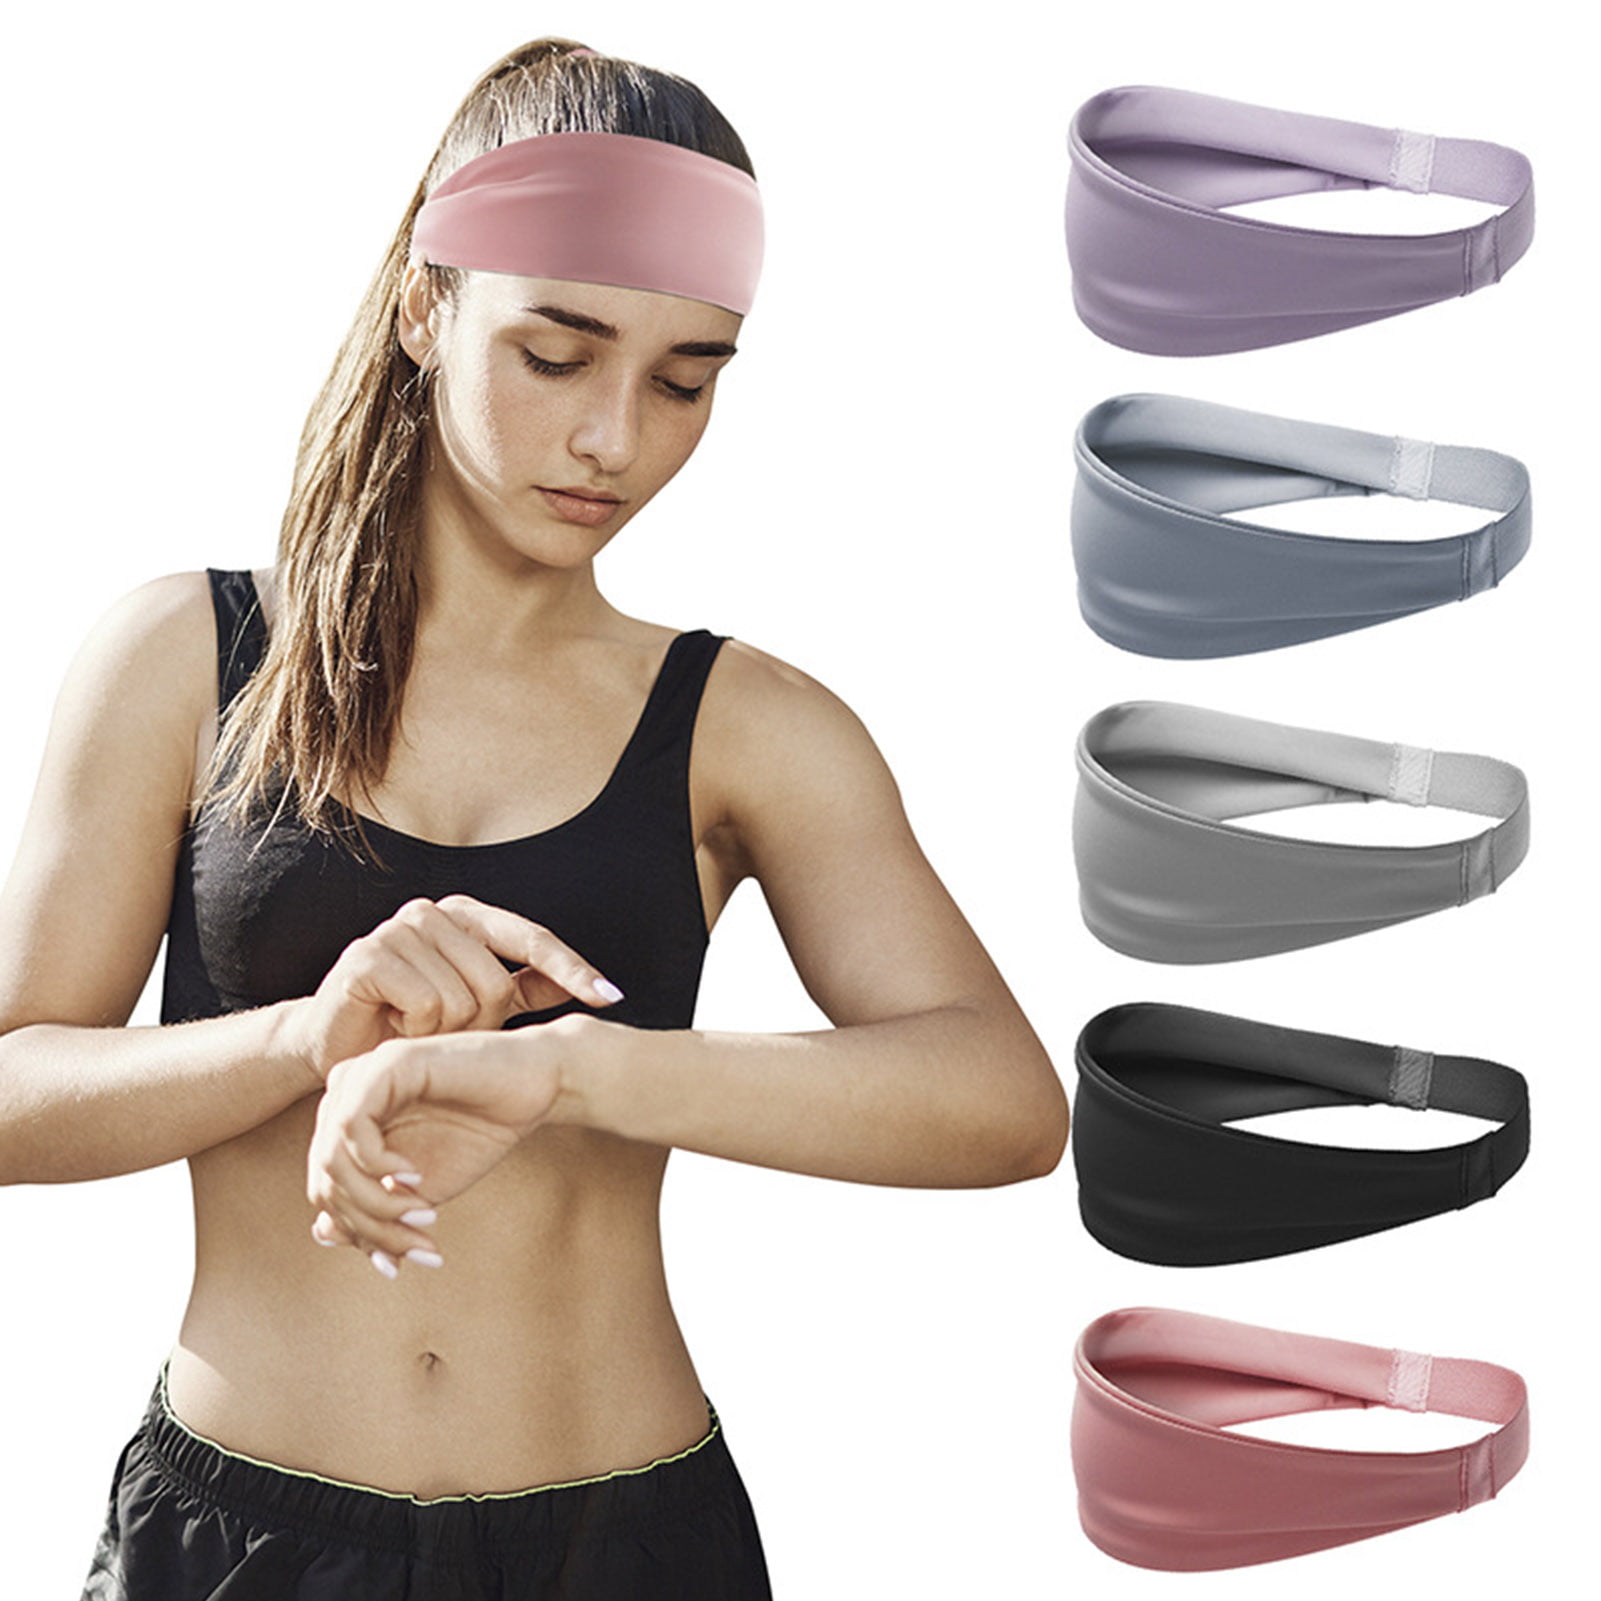 ETCBUYS Sports Fitness Headband Running Basketball Athletic Women’s Headband and Work-Out Head Wrap Sweatband For Yoga 5 Pack Black Girls Fashion